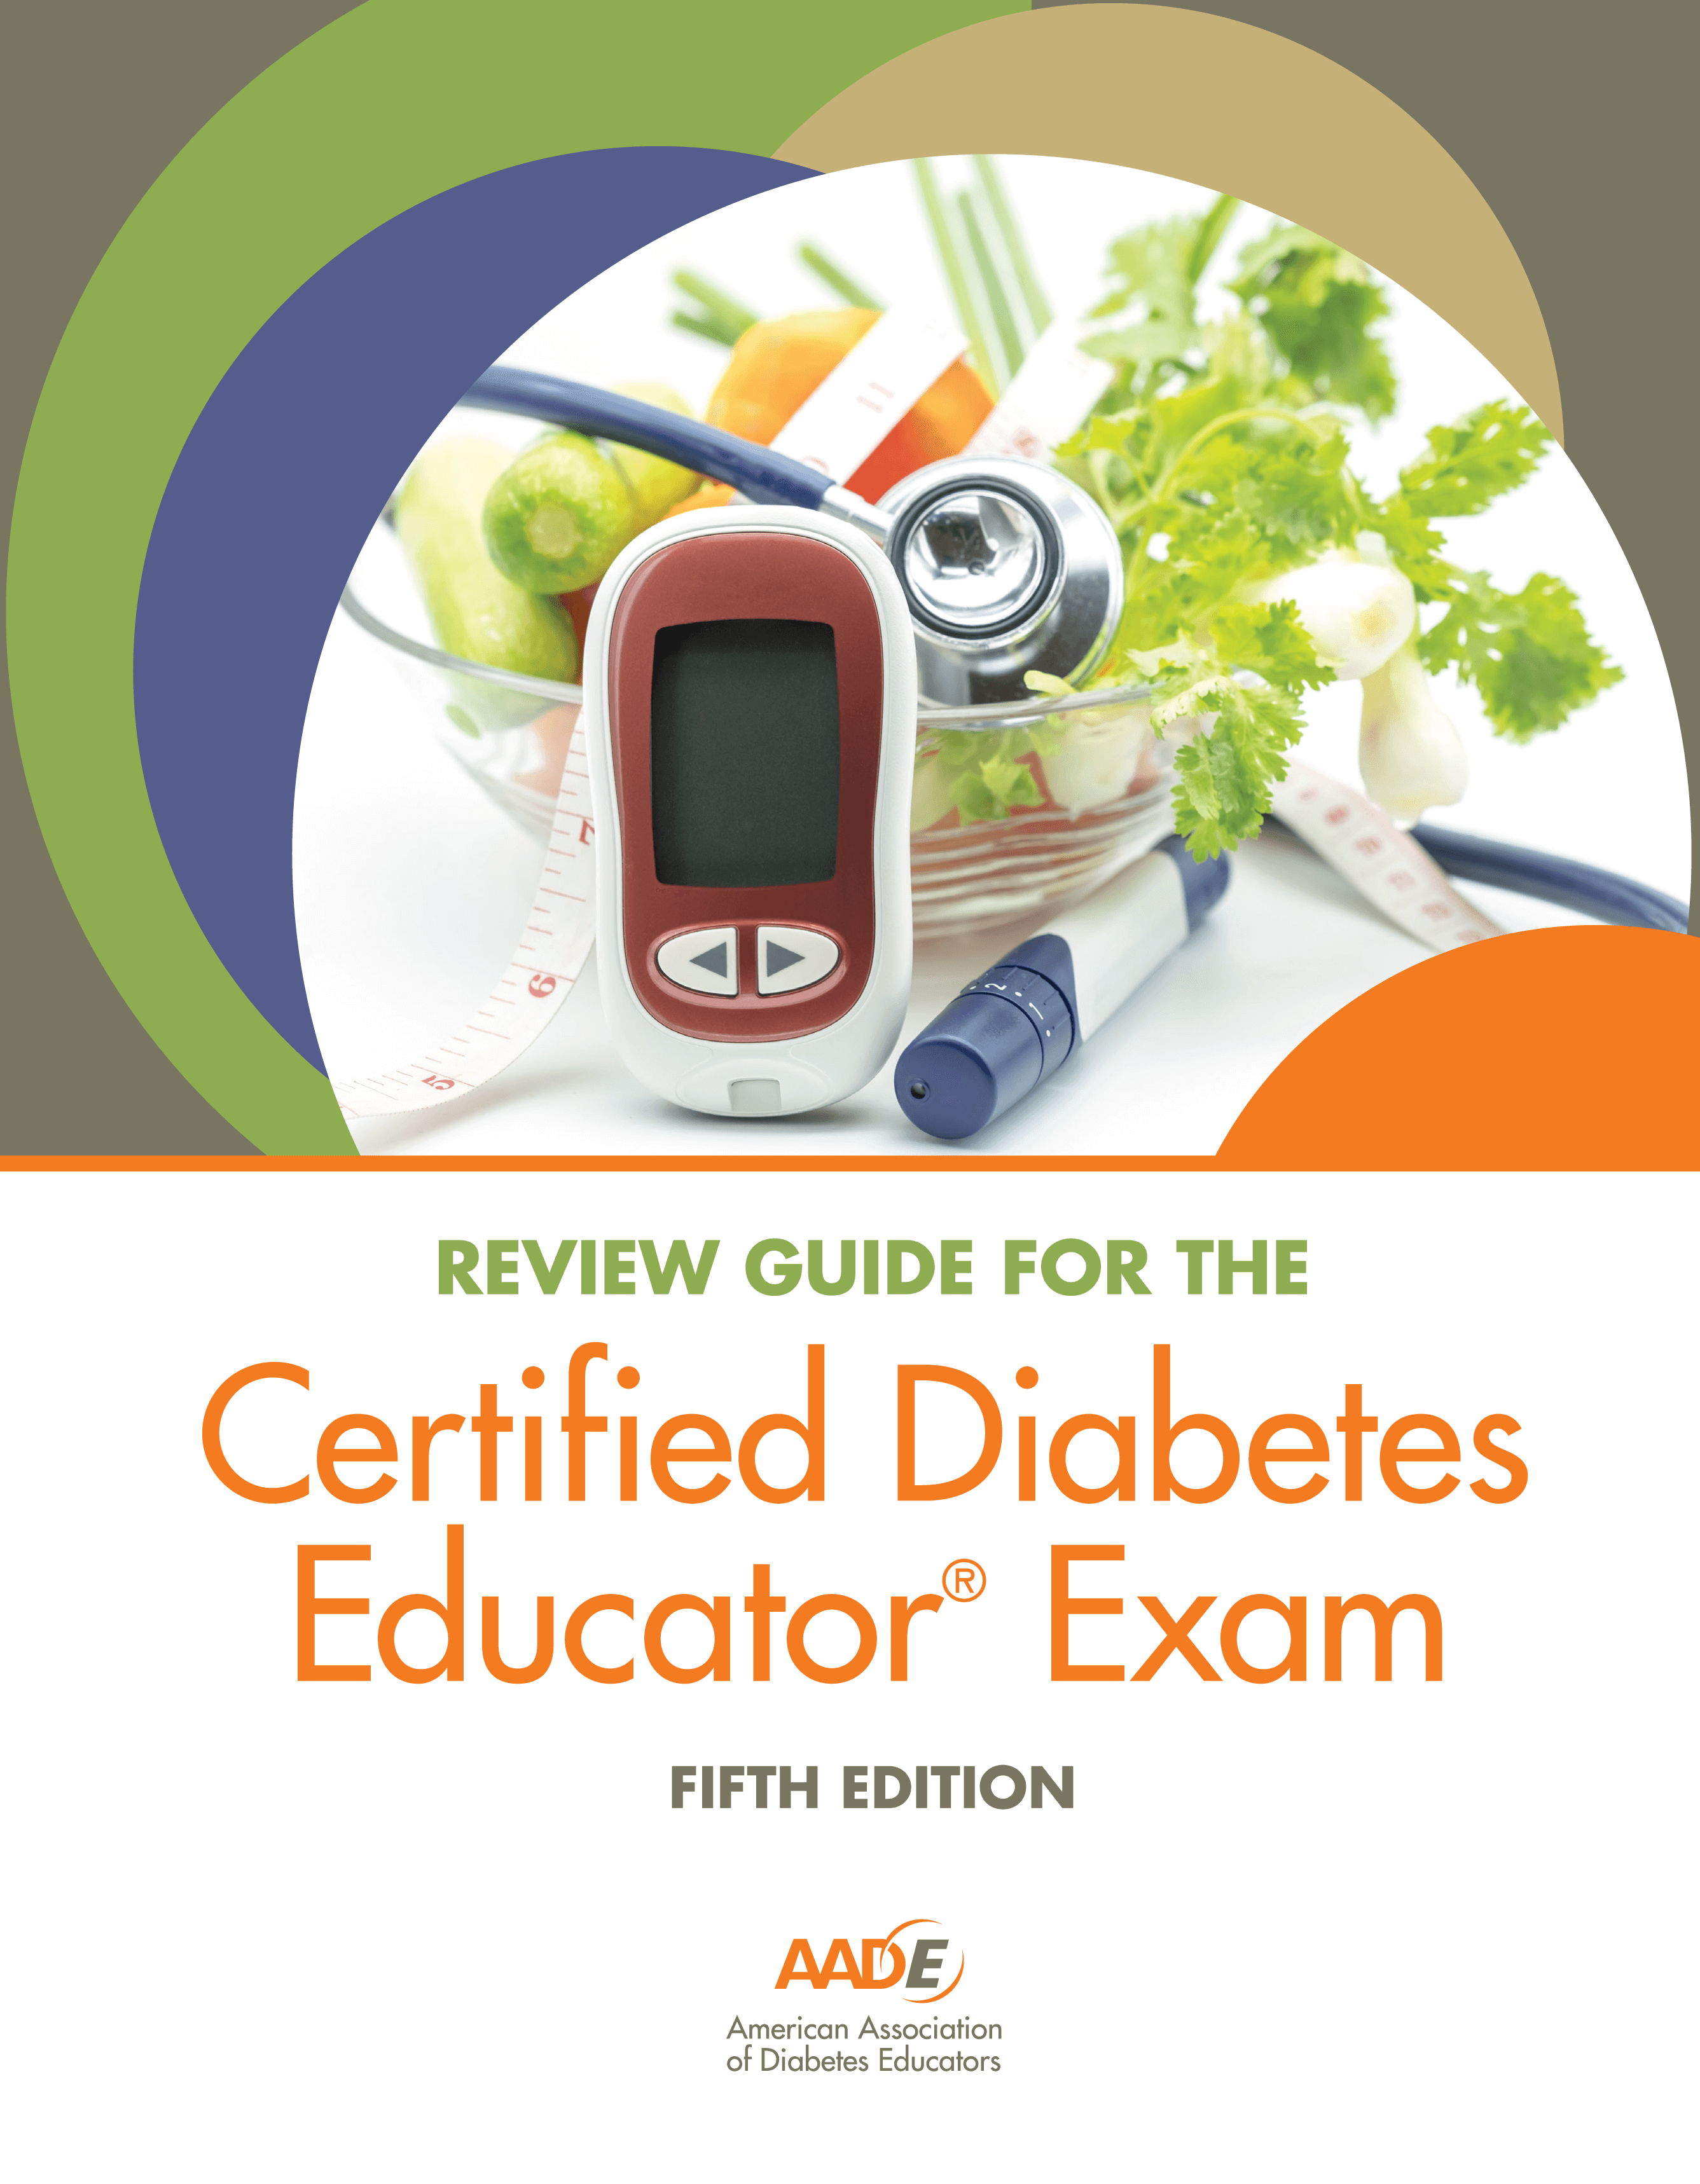 AADE Review Guide for the CDE Exam